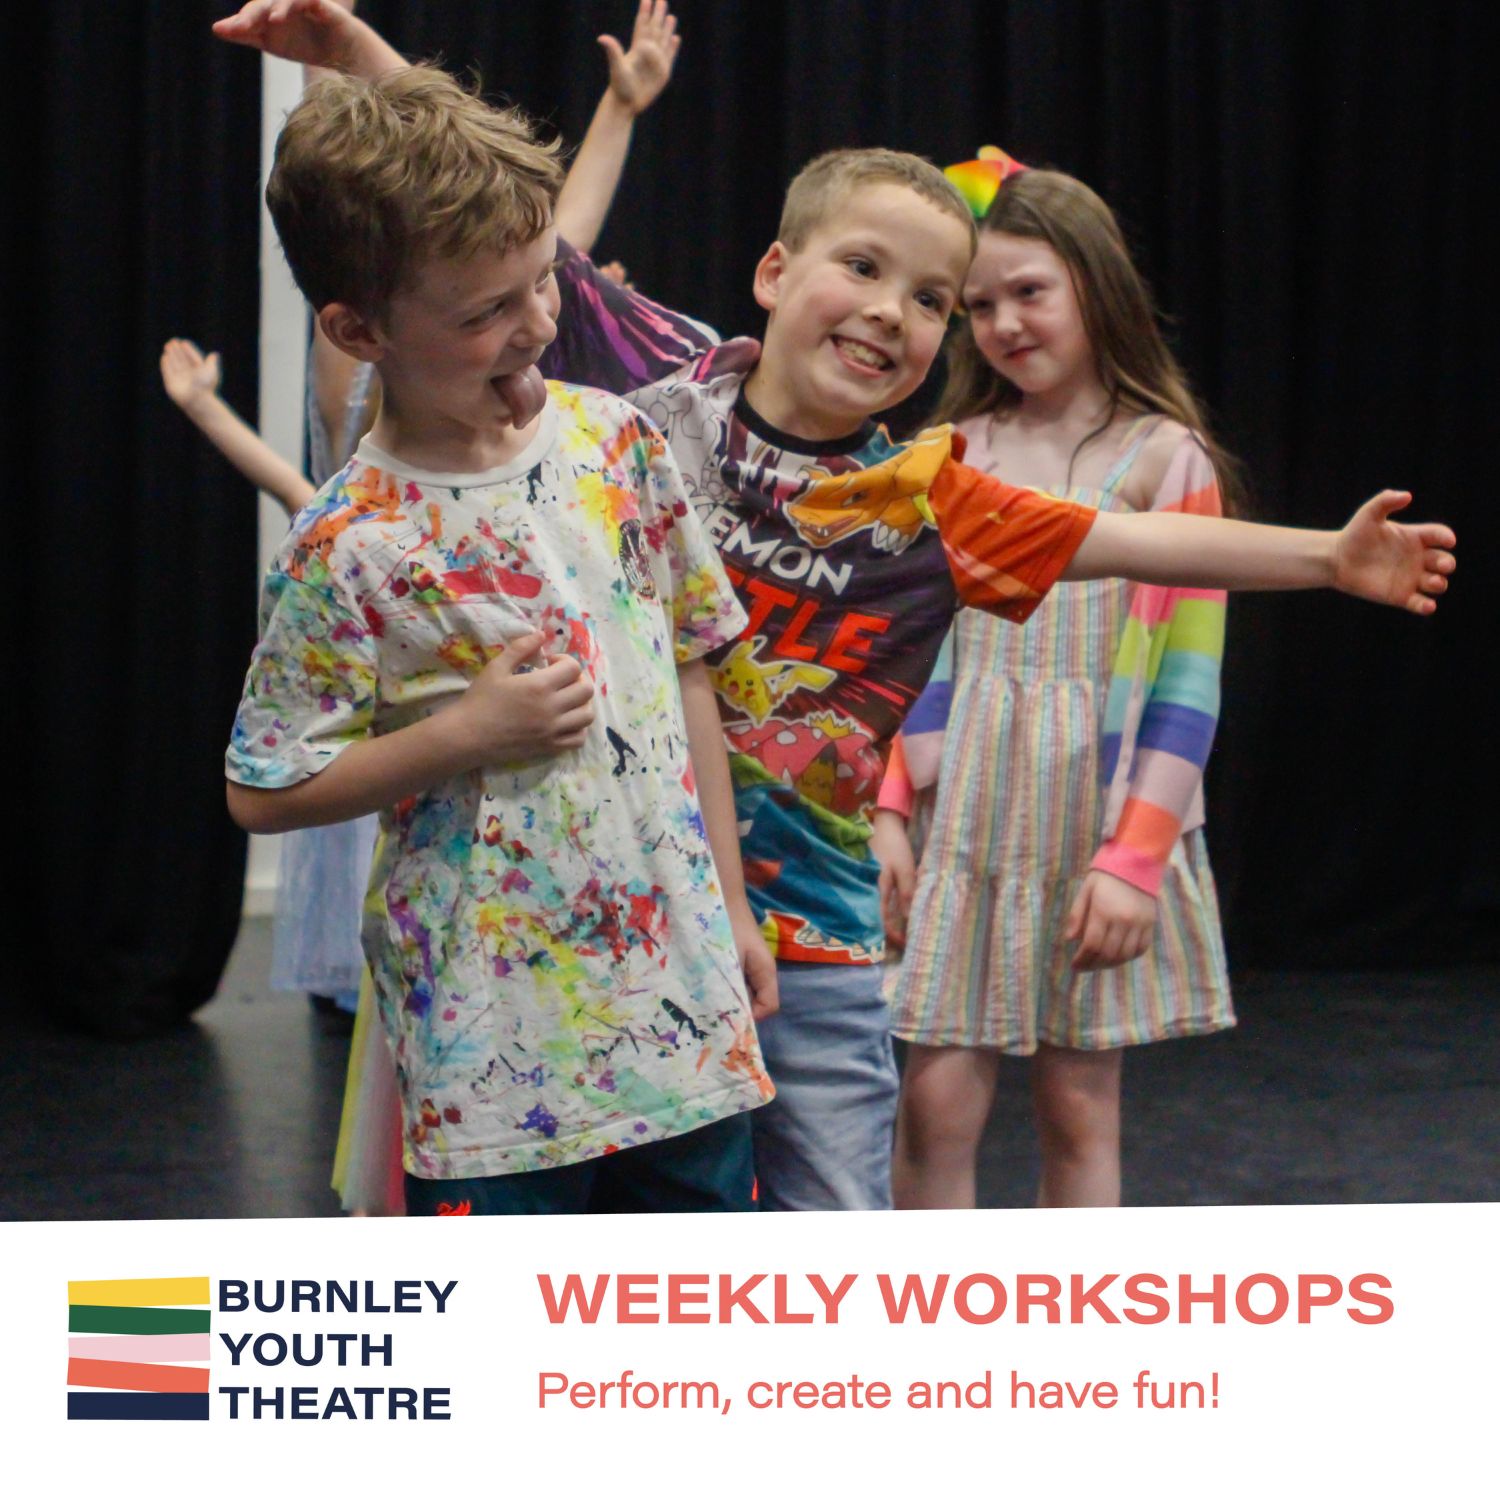 Theatre Workshops for Ages 3-11